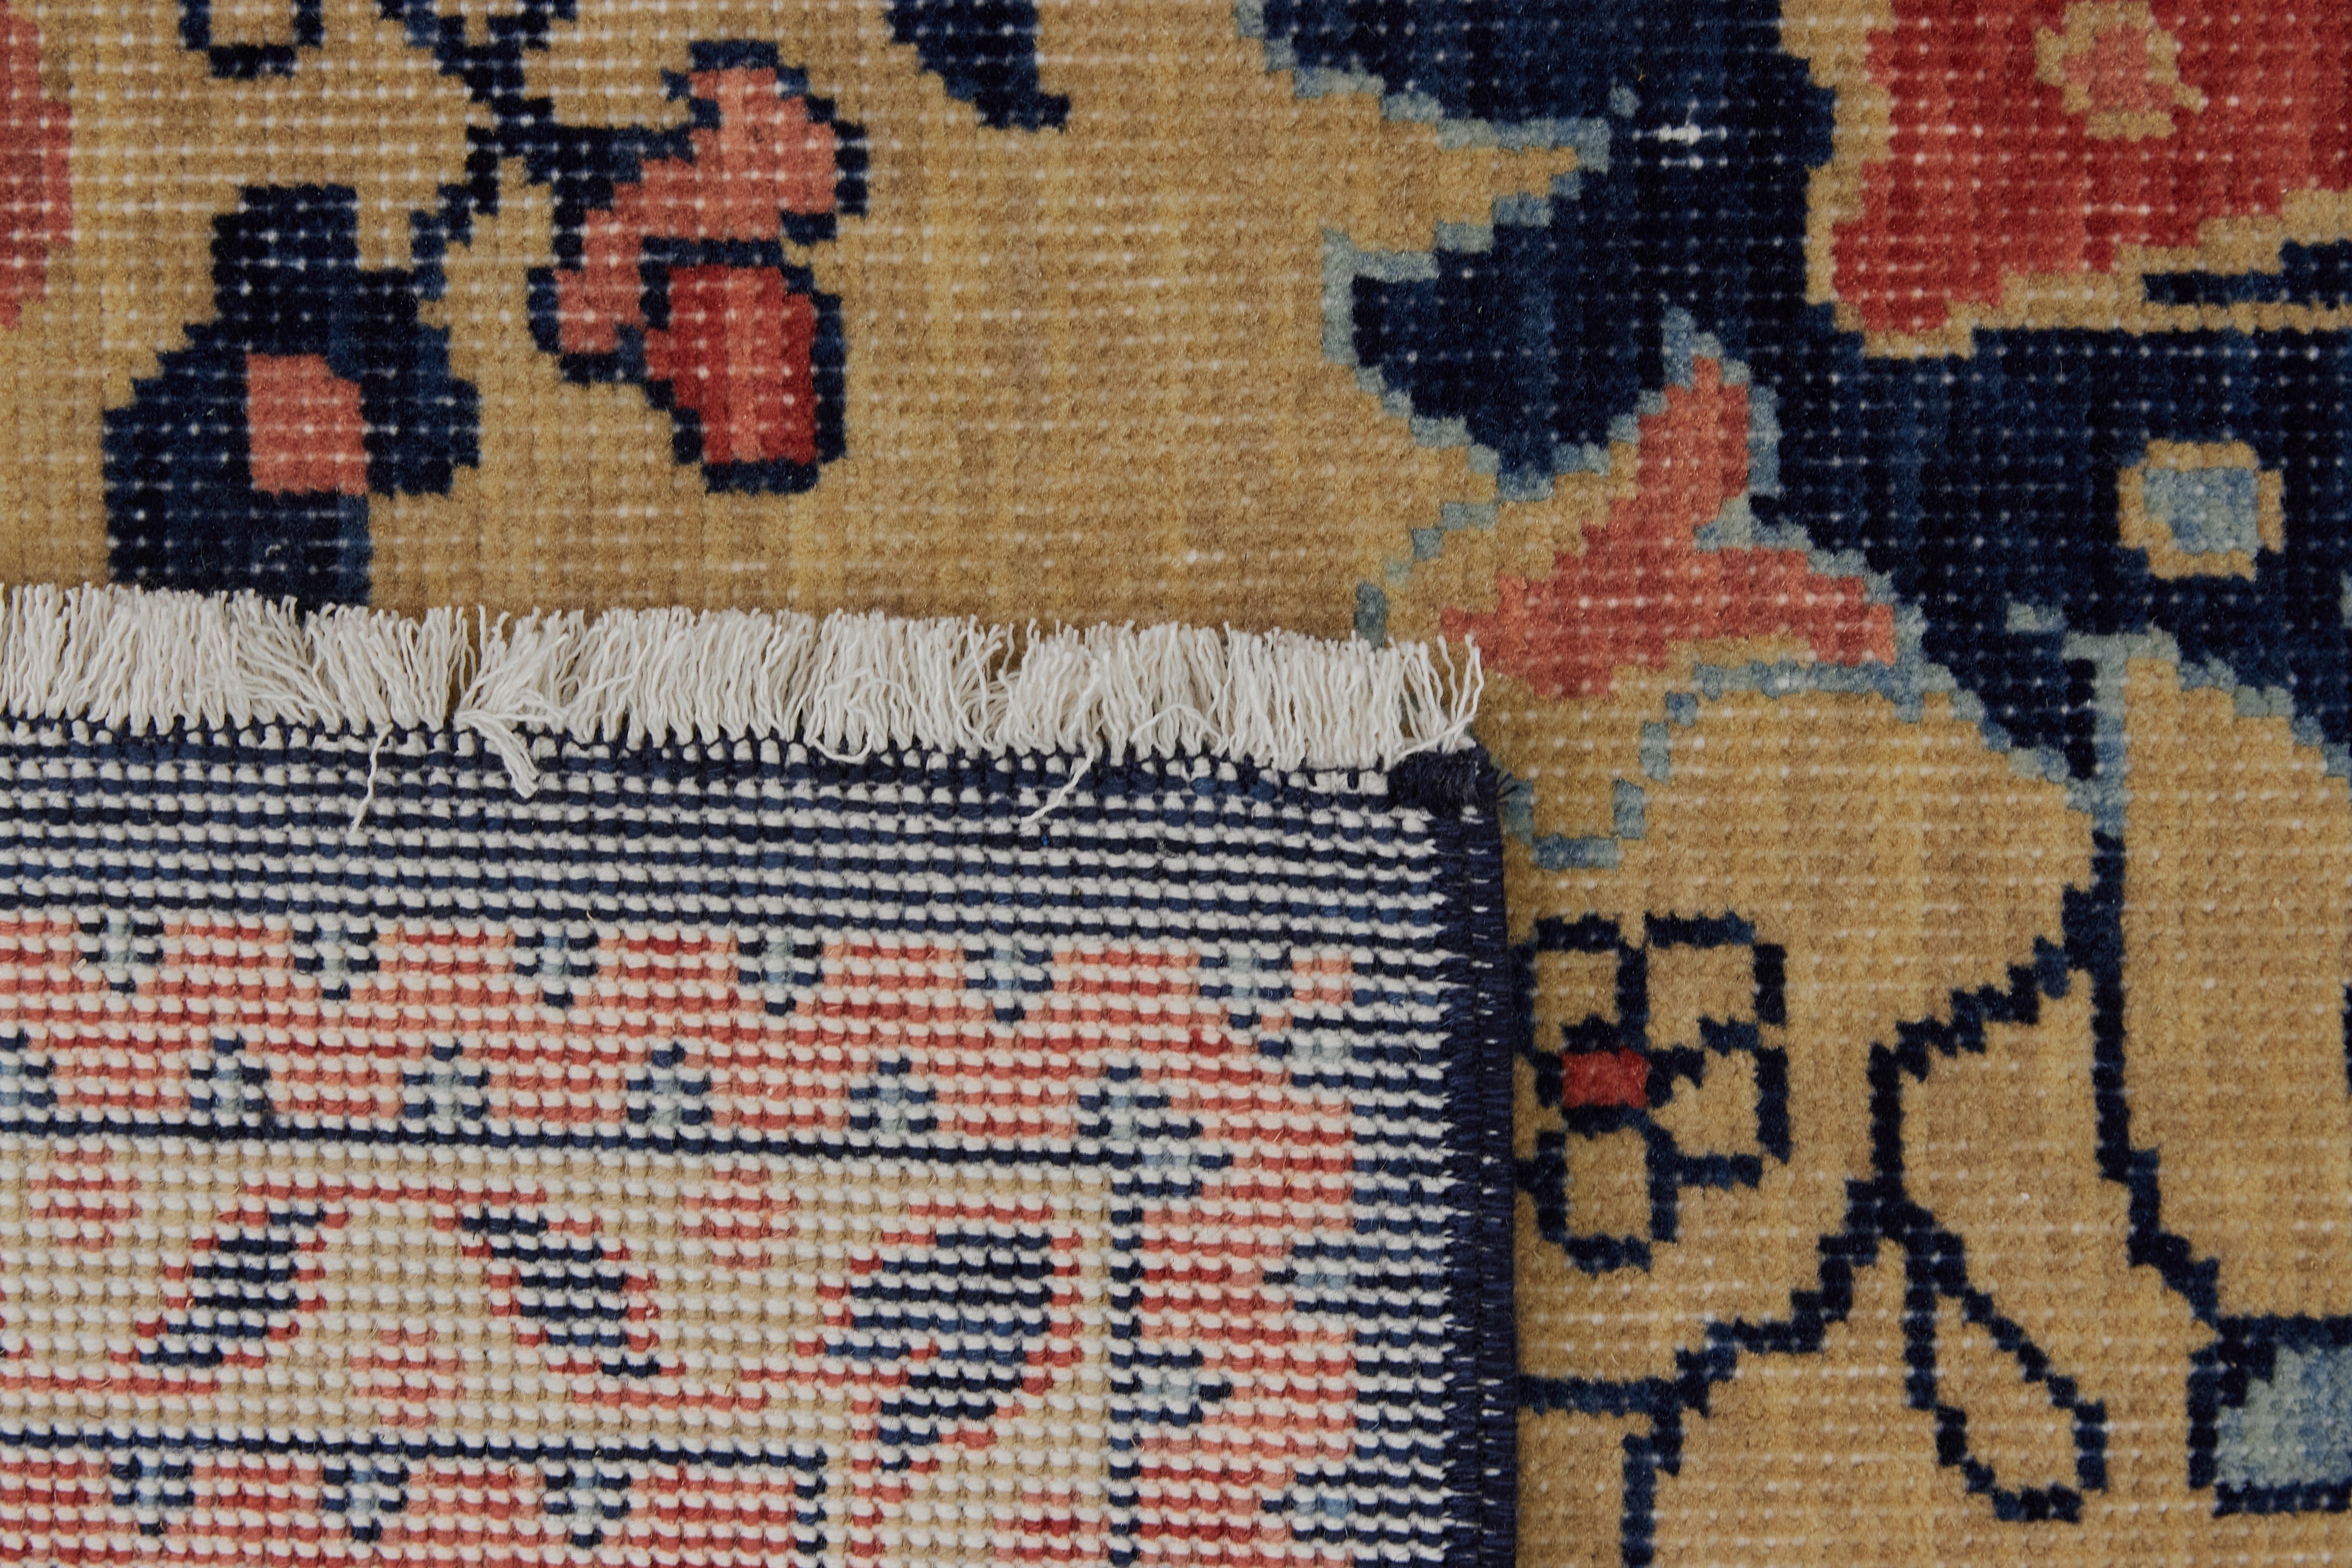 Sophisticated Weaving - Halo's Turkish Carpet Expertise